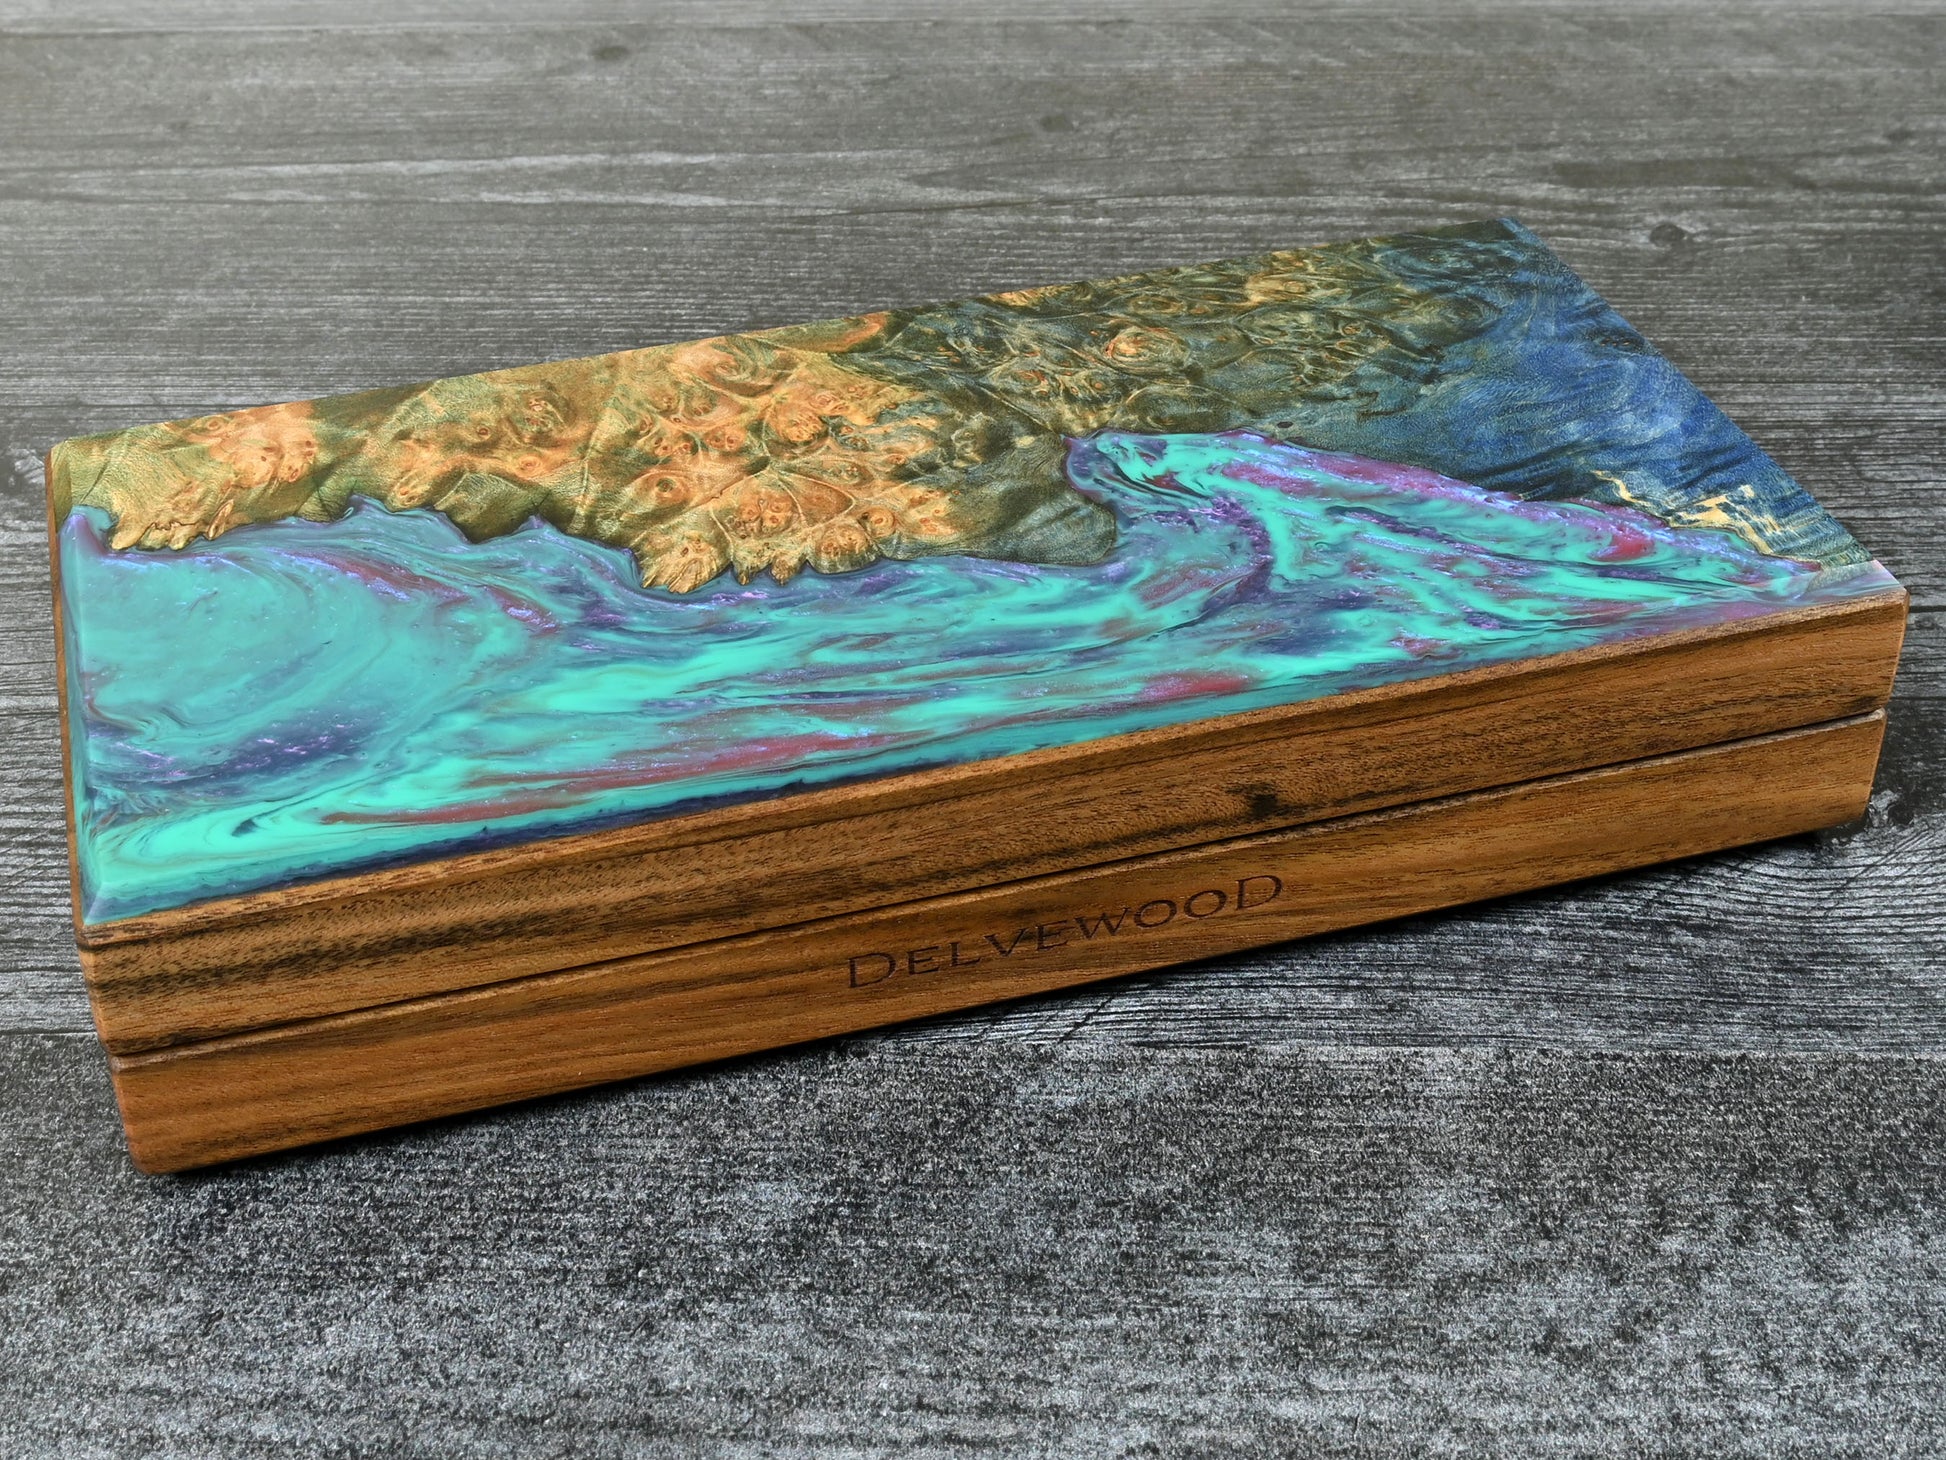 This Delver's Kit Dice Box features a Patagonian rosewood core and an Bluegreen maple burl top veneer with blue, purple, and fuchsia resin. D&D ttrpg.